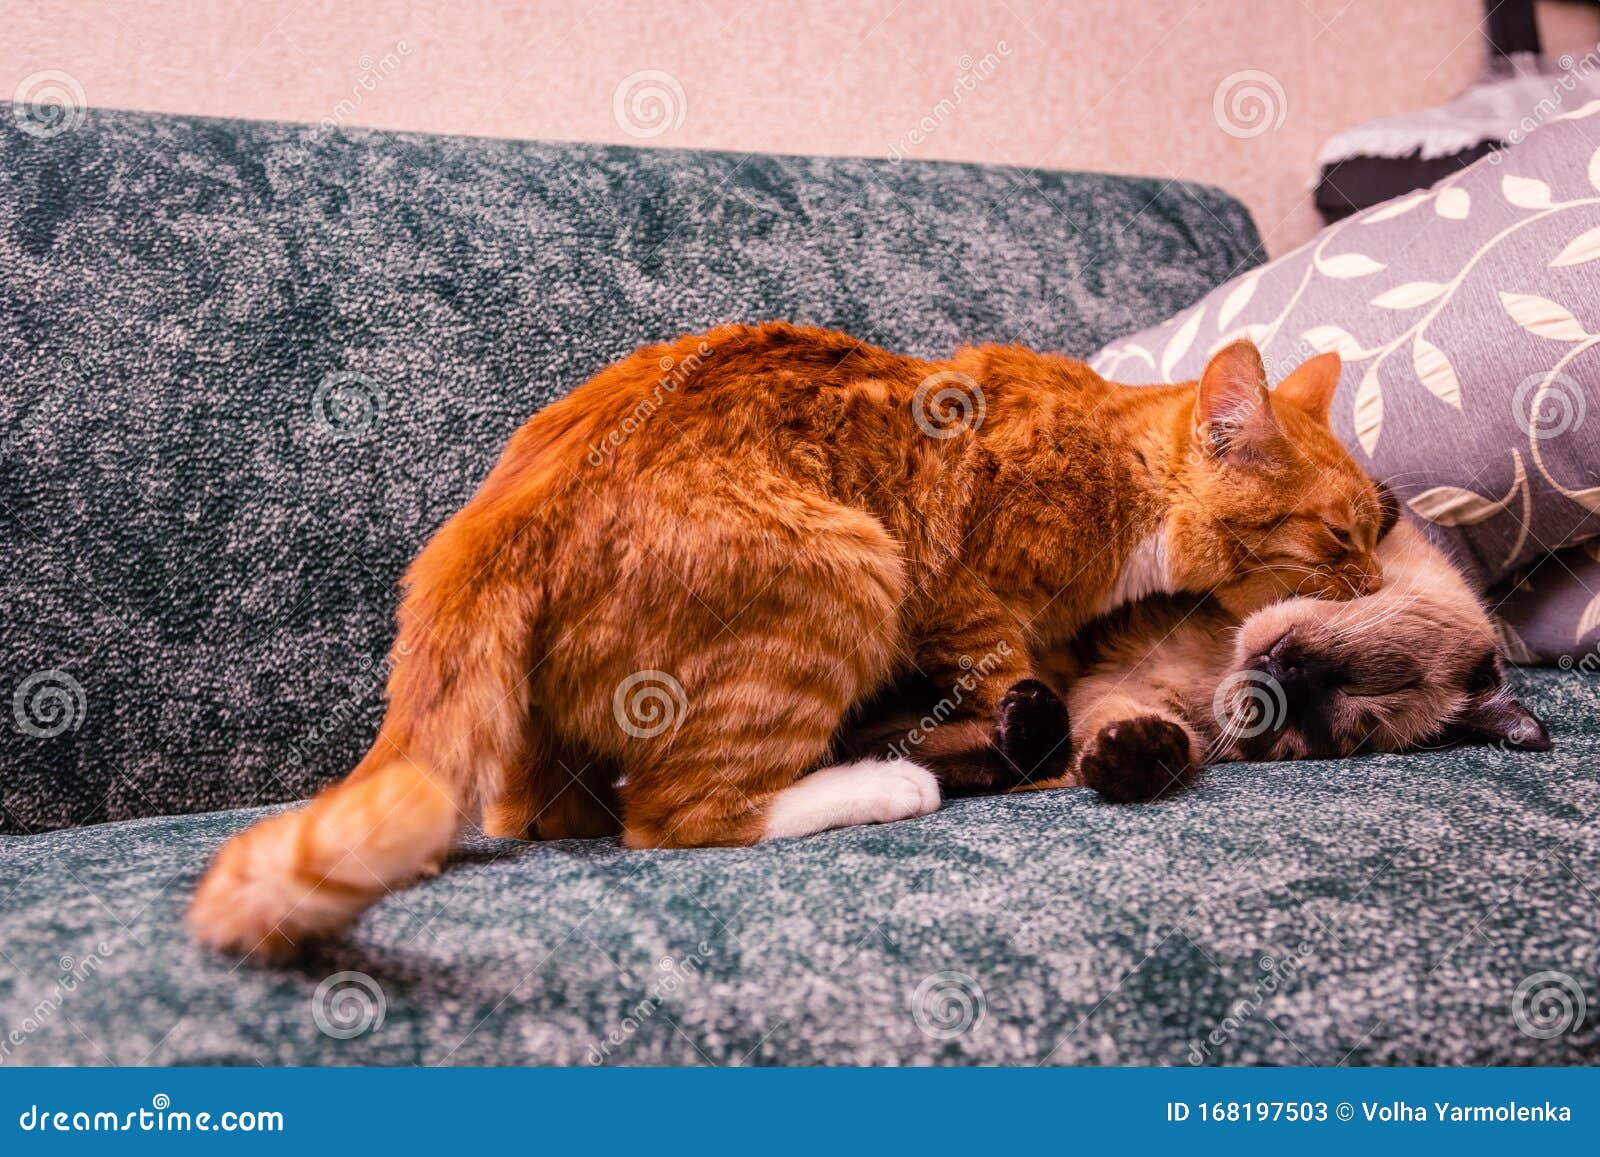 Young Red Cat Attacks Old Siamese Cat Stock Image - Image of nice ...